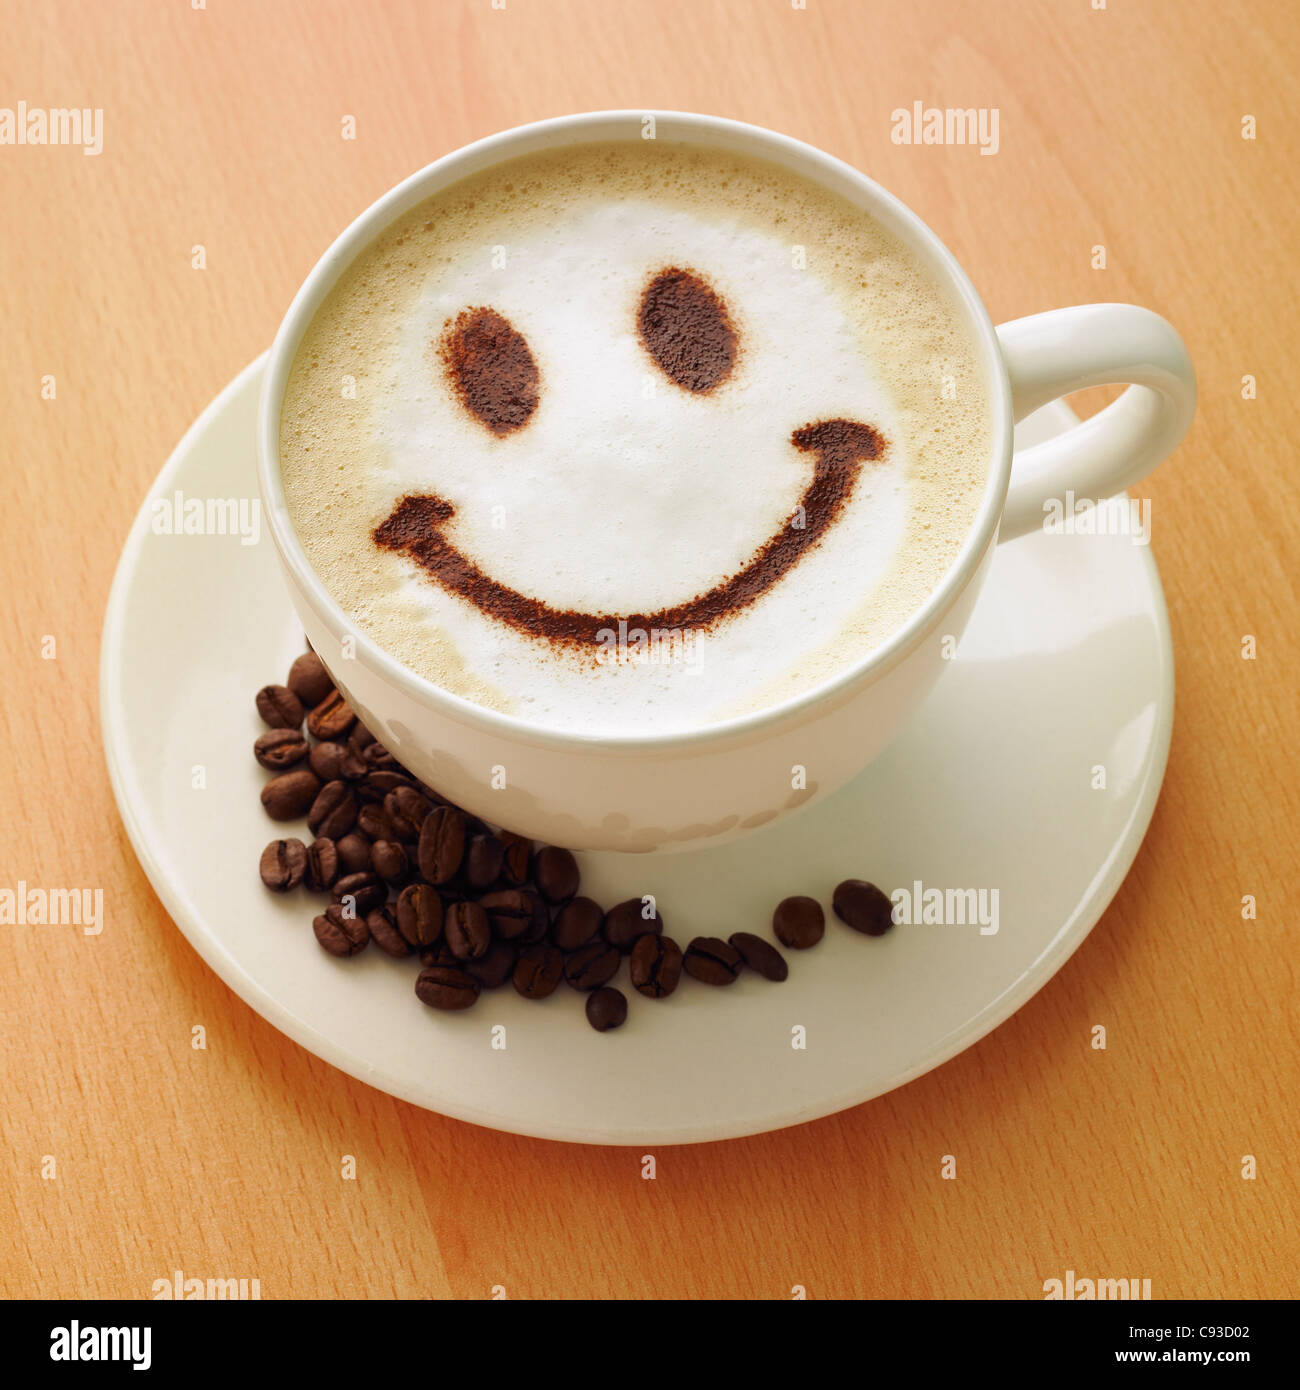 Cappuccino coffee with a chocolate powder smiley face on the top and coffee beans on the saucer. Stock Photo